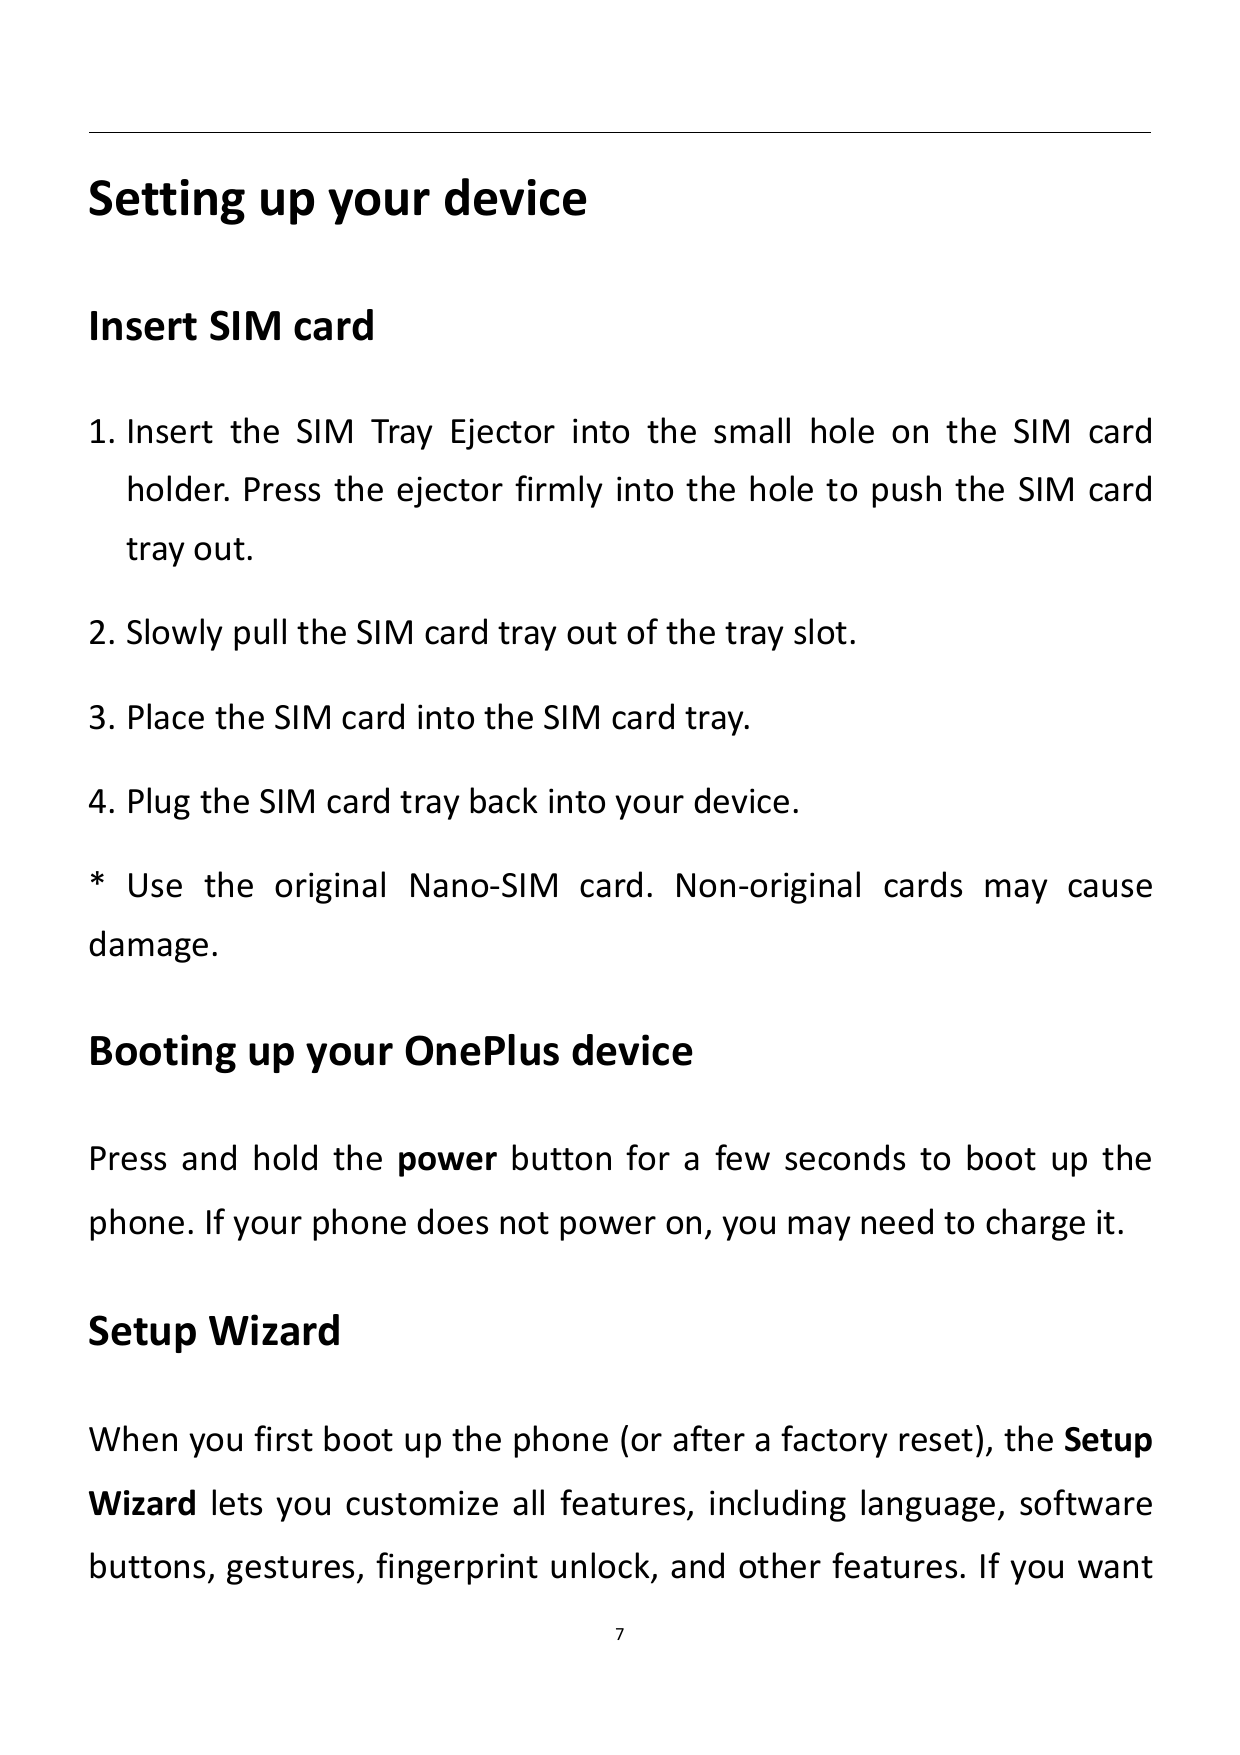 Setting up your deviceInsert SIM card1. Insert the SIM Tray Ejector into the small hole on the SIM cardholder. Press the ejector